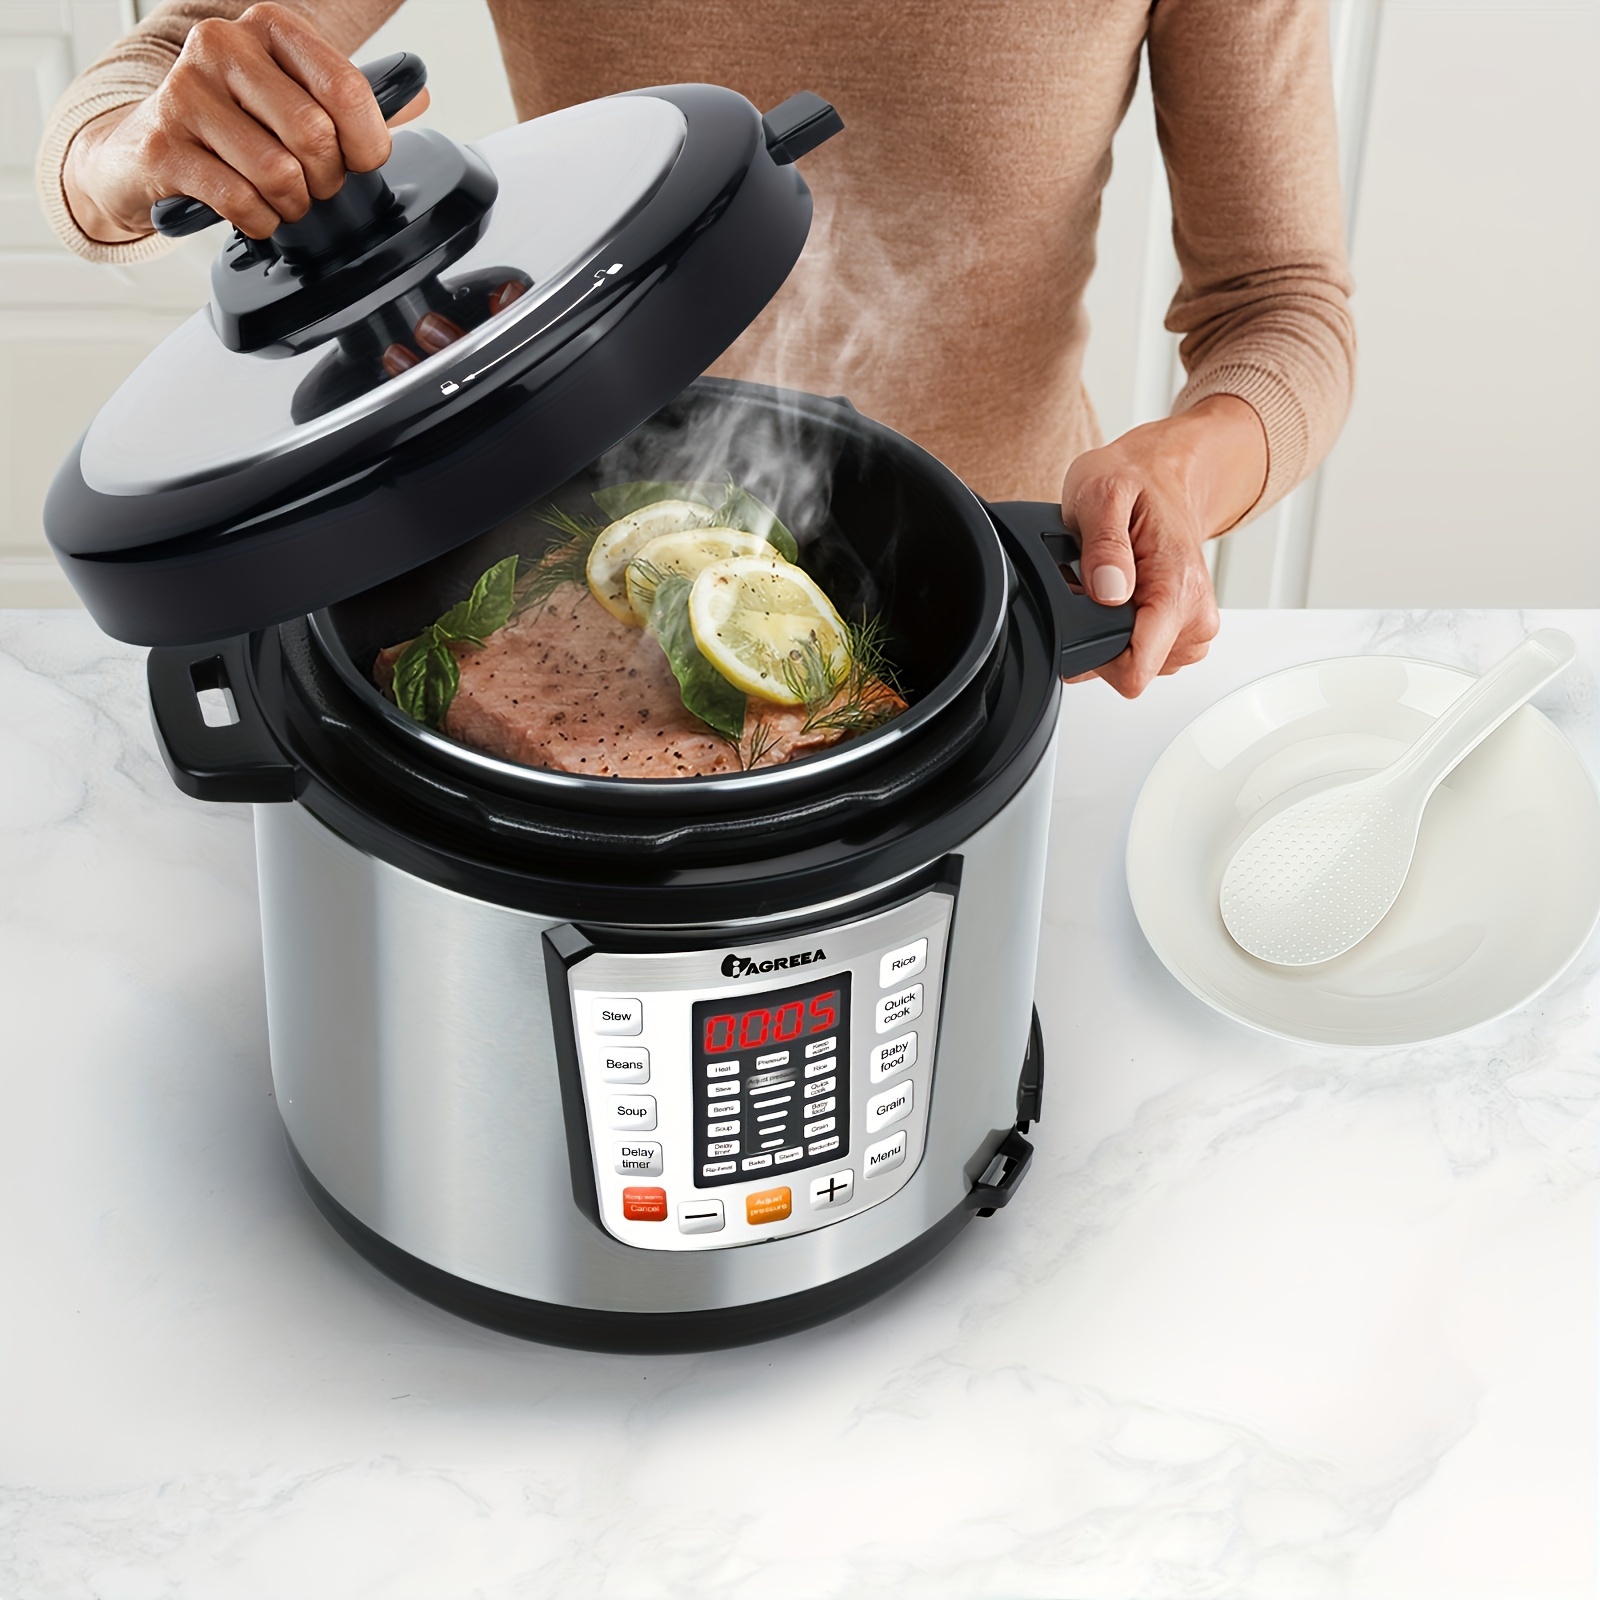 7-in-1 Electric Pressure Cooker Duo, Sterilizer, Slow Cooker, Rice Cooker,  Steamer, Saute, Yogurt Maker, and Warmer